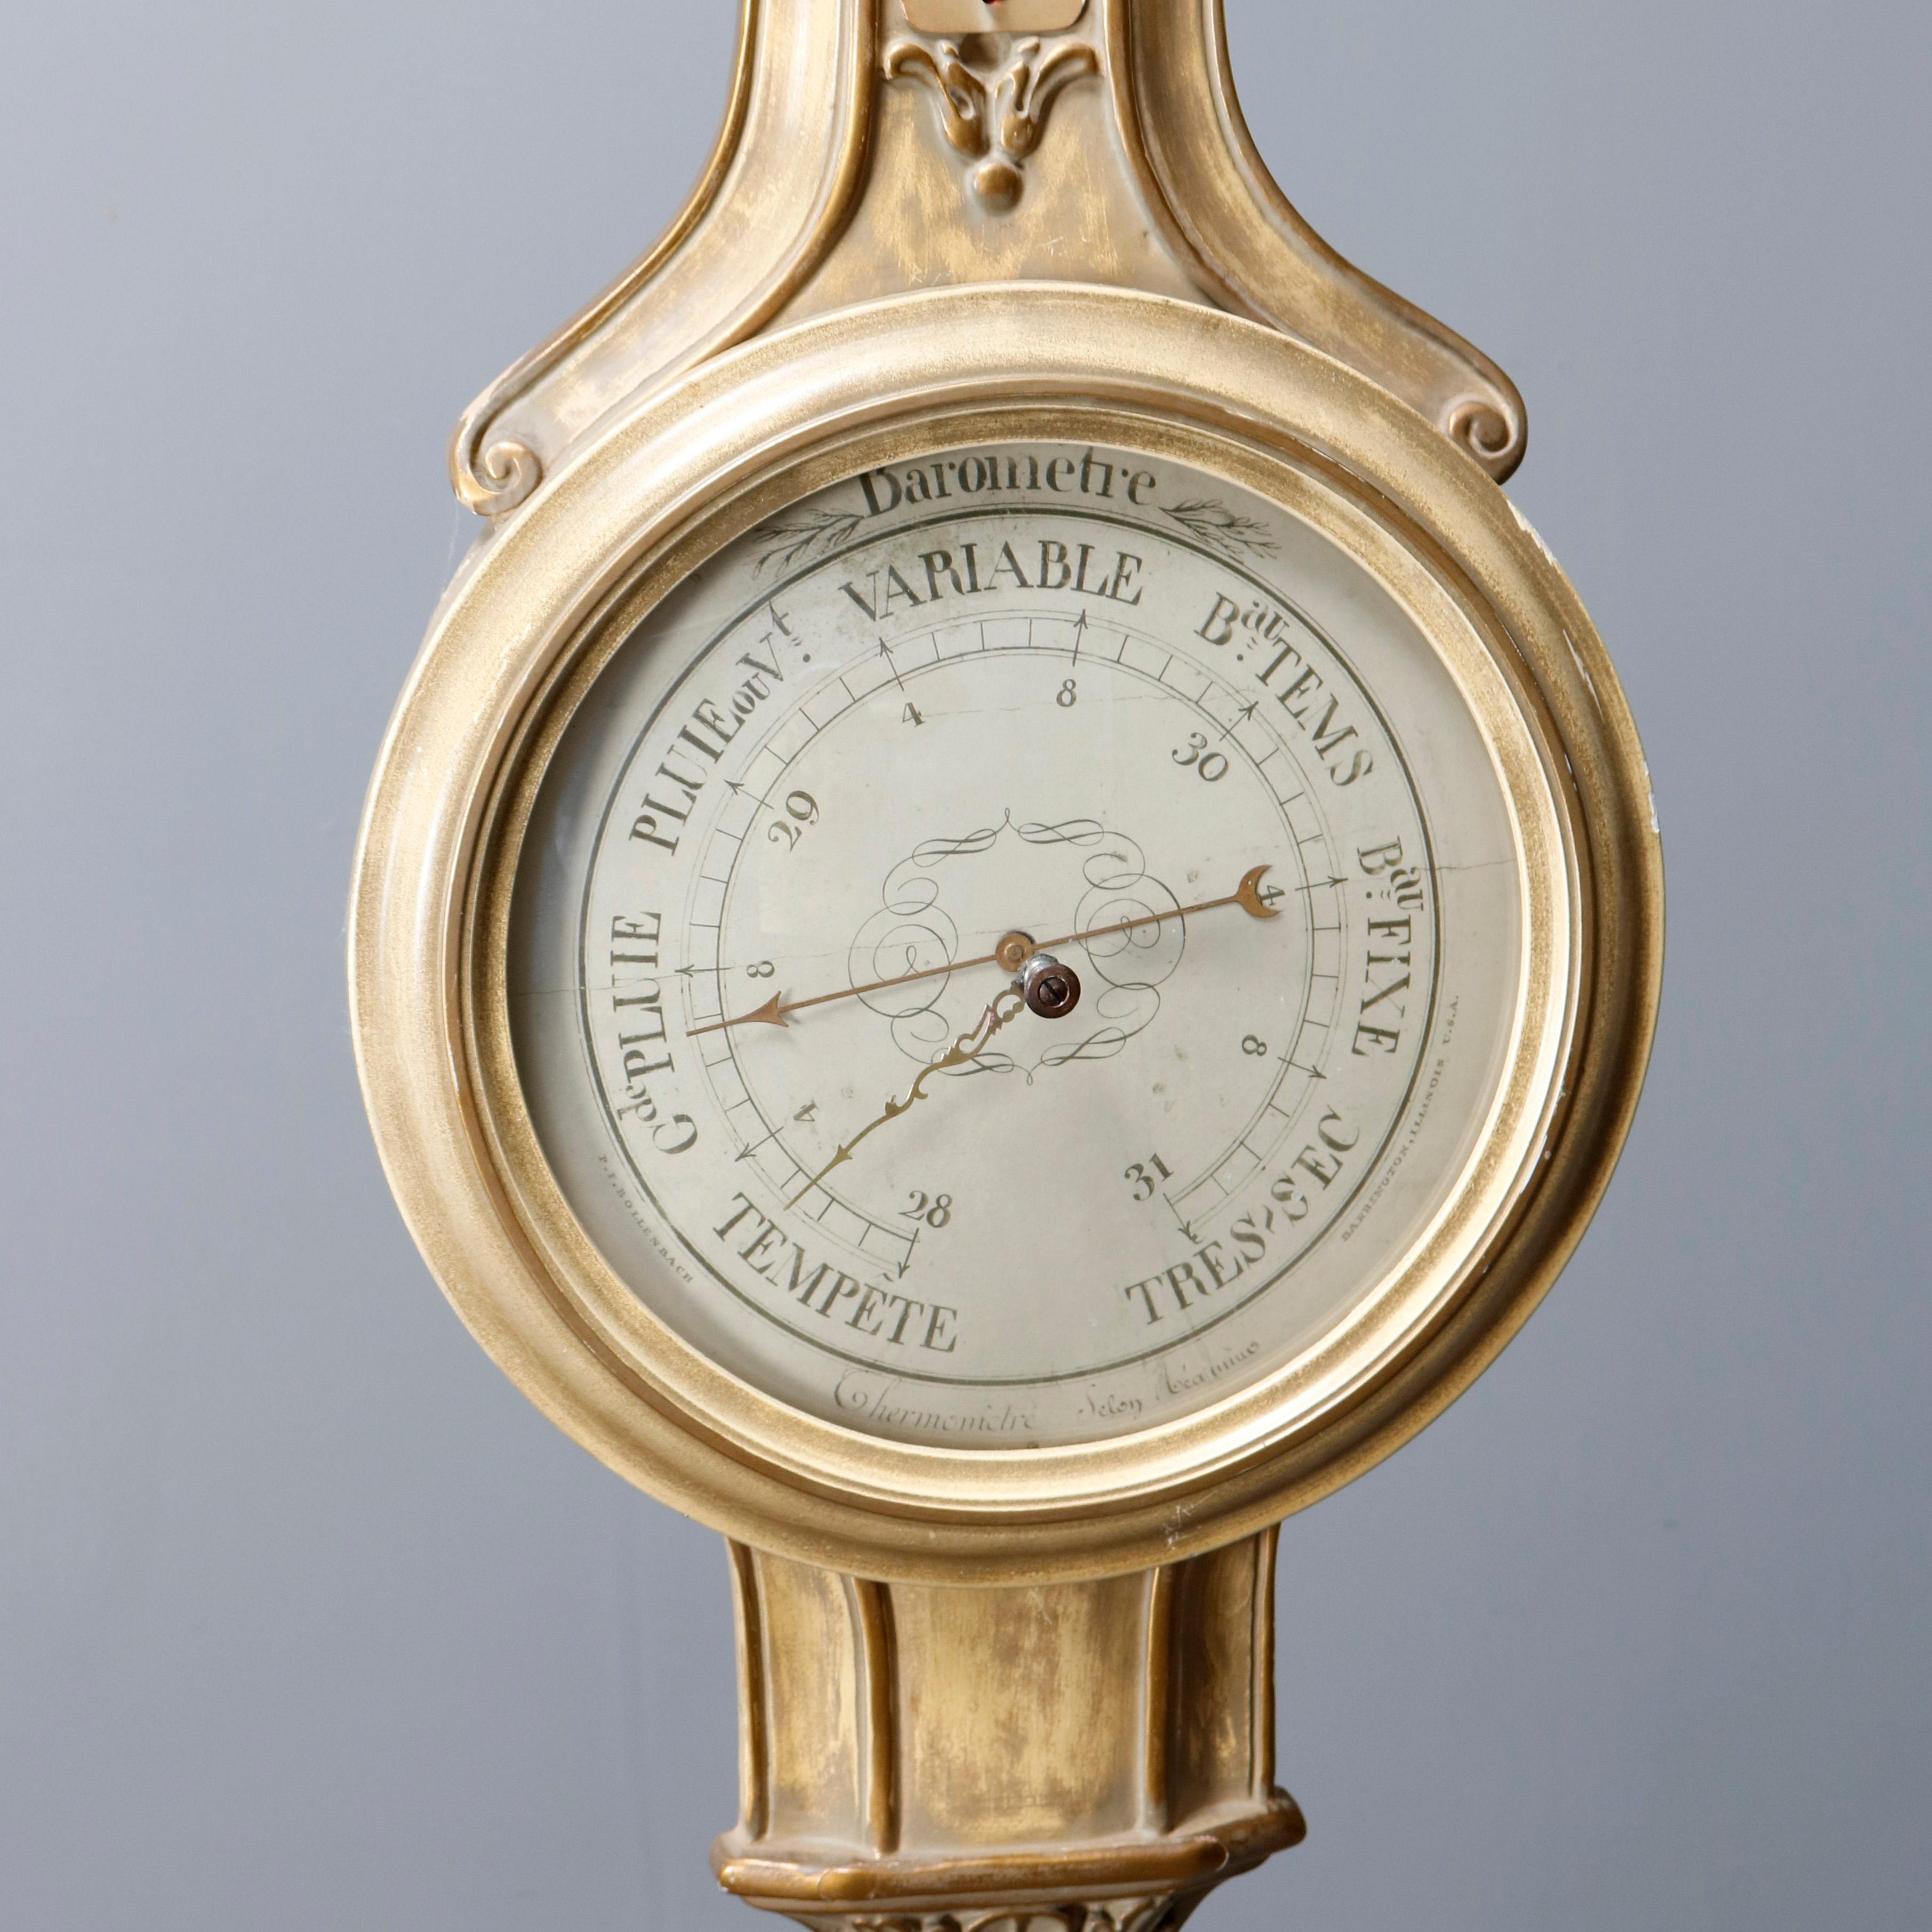 A contemporary American wall mount thermometer/barometer by P.F. Bollenbach offers giltwood case in French neoclassical styling with urn form crest and carved acanthus drop finial, 20th century.

Measures: 40